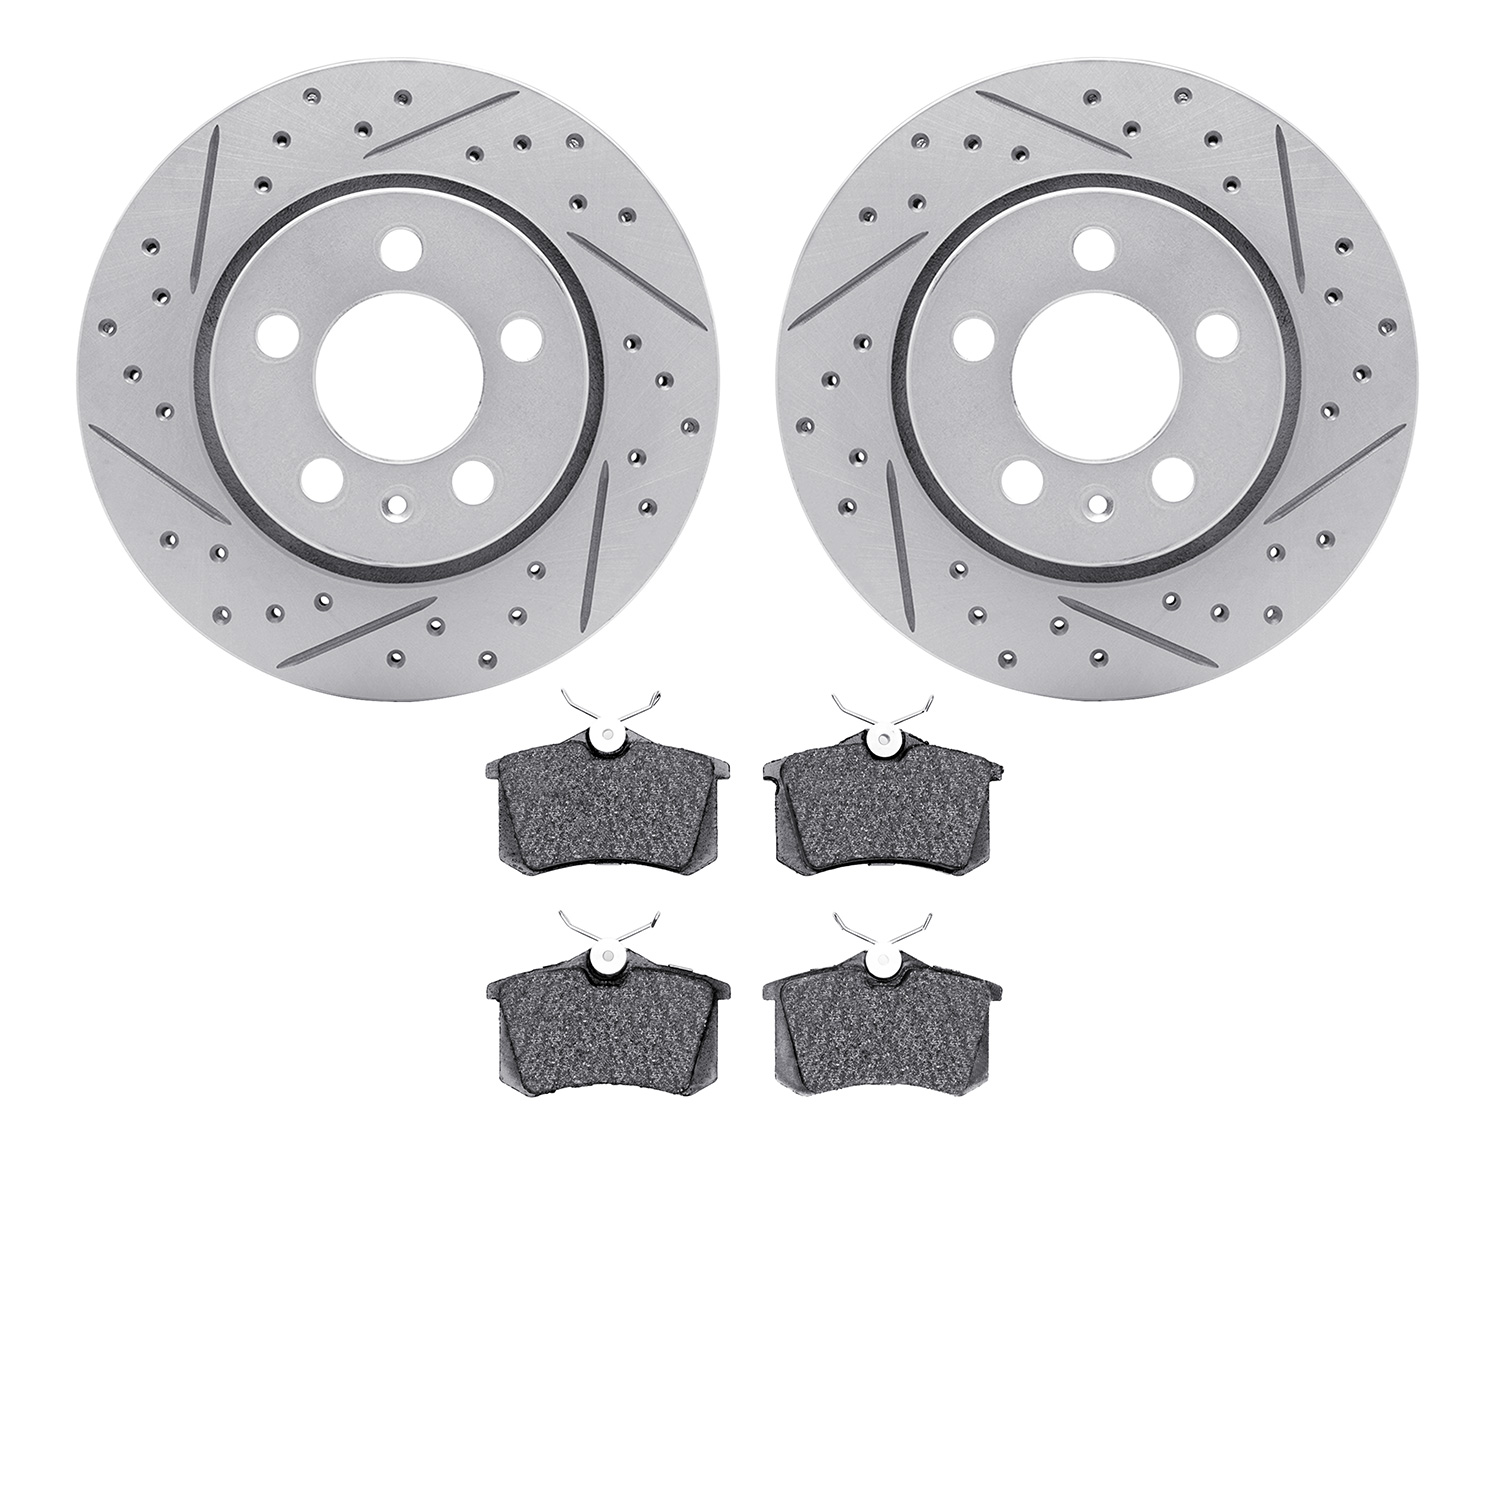 2502-74029 Geoperformance Drilled/Slotted Rotors w/5000 Advanced Brake Pads Kit, 2004-2005 Audi/Volkswagen, Position: Rear